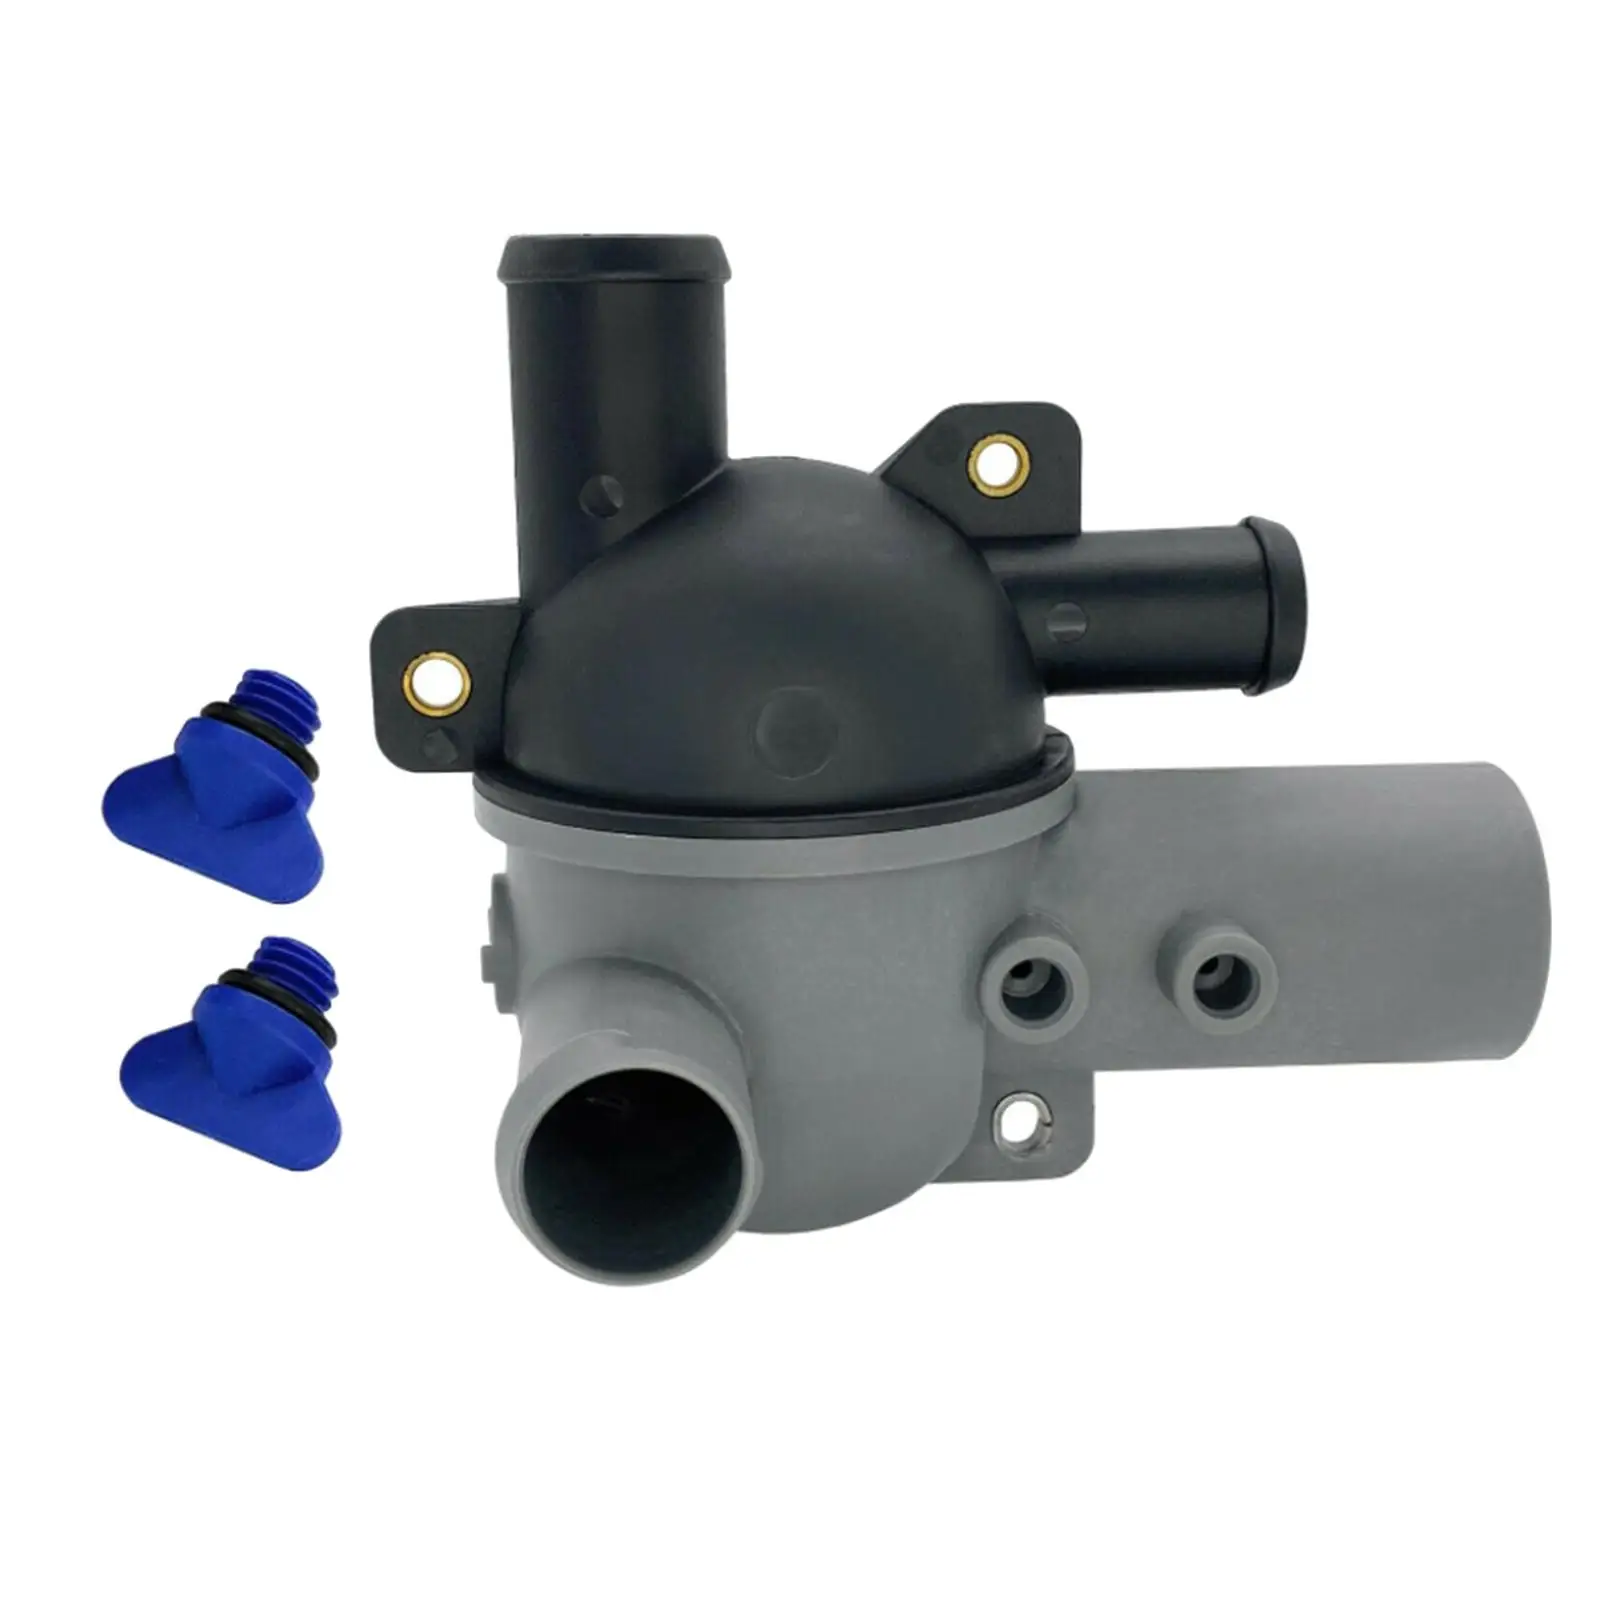 Manual Drain Water Distribution Housing with Drain Plugs Control Valve Fit for Inboard Easy Installation